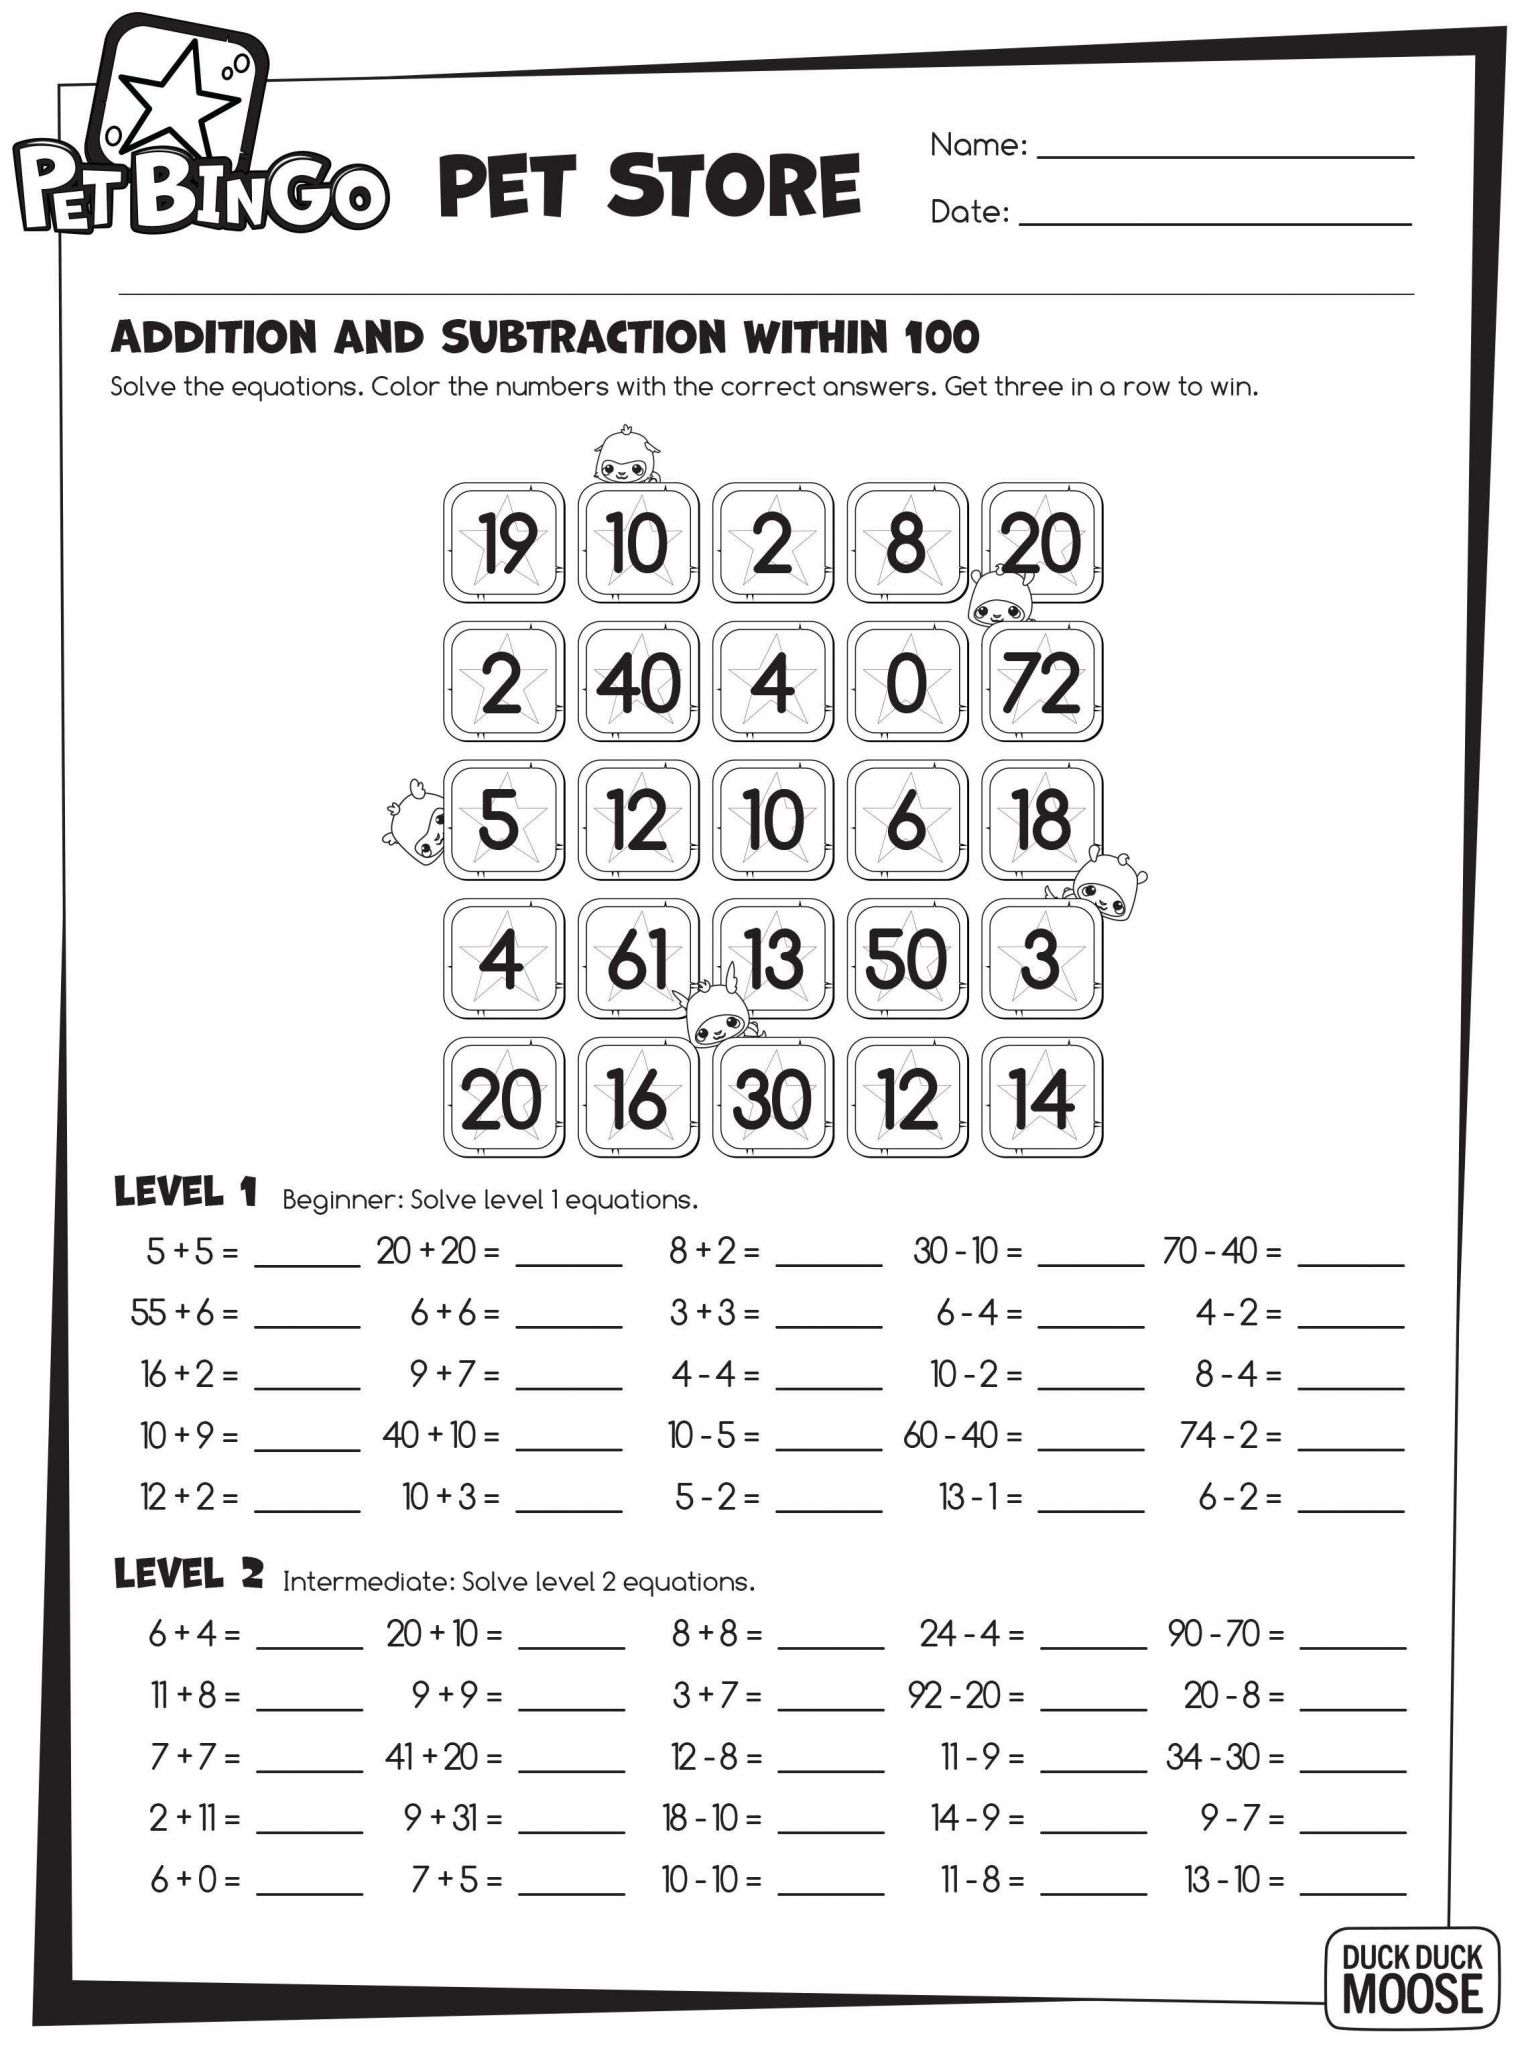 Factoring Distributive Property Worksheet Answers Along with Multiplication Worksheet Games for 3rd Grade Refrence Additions